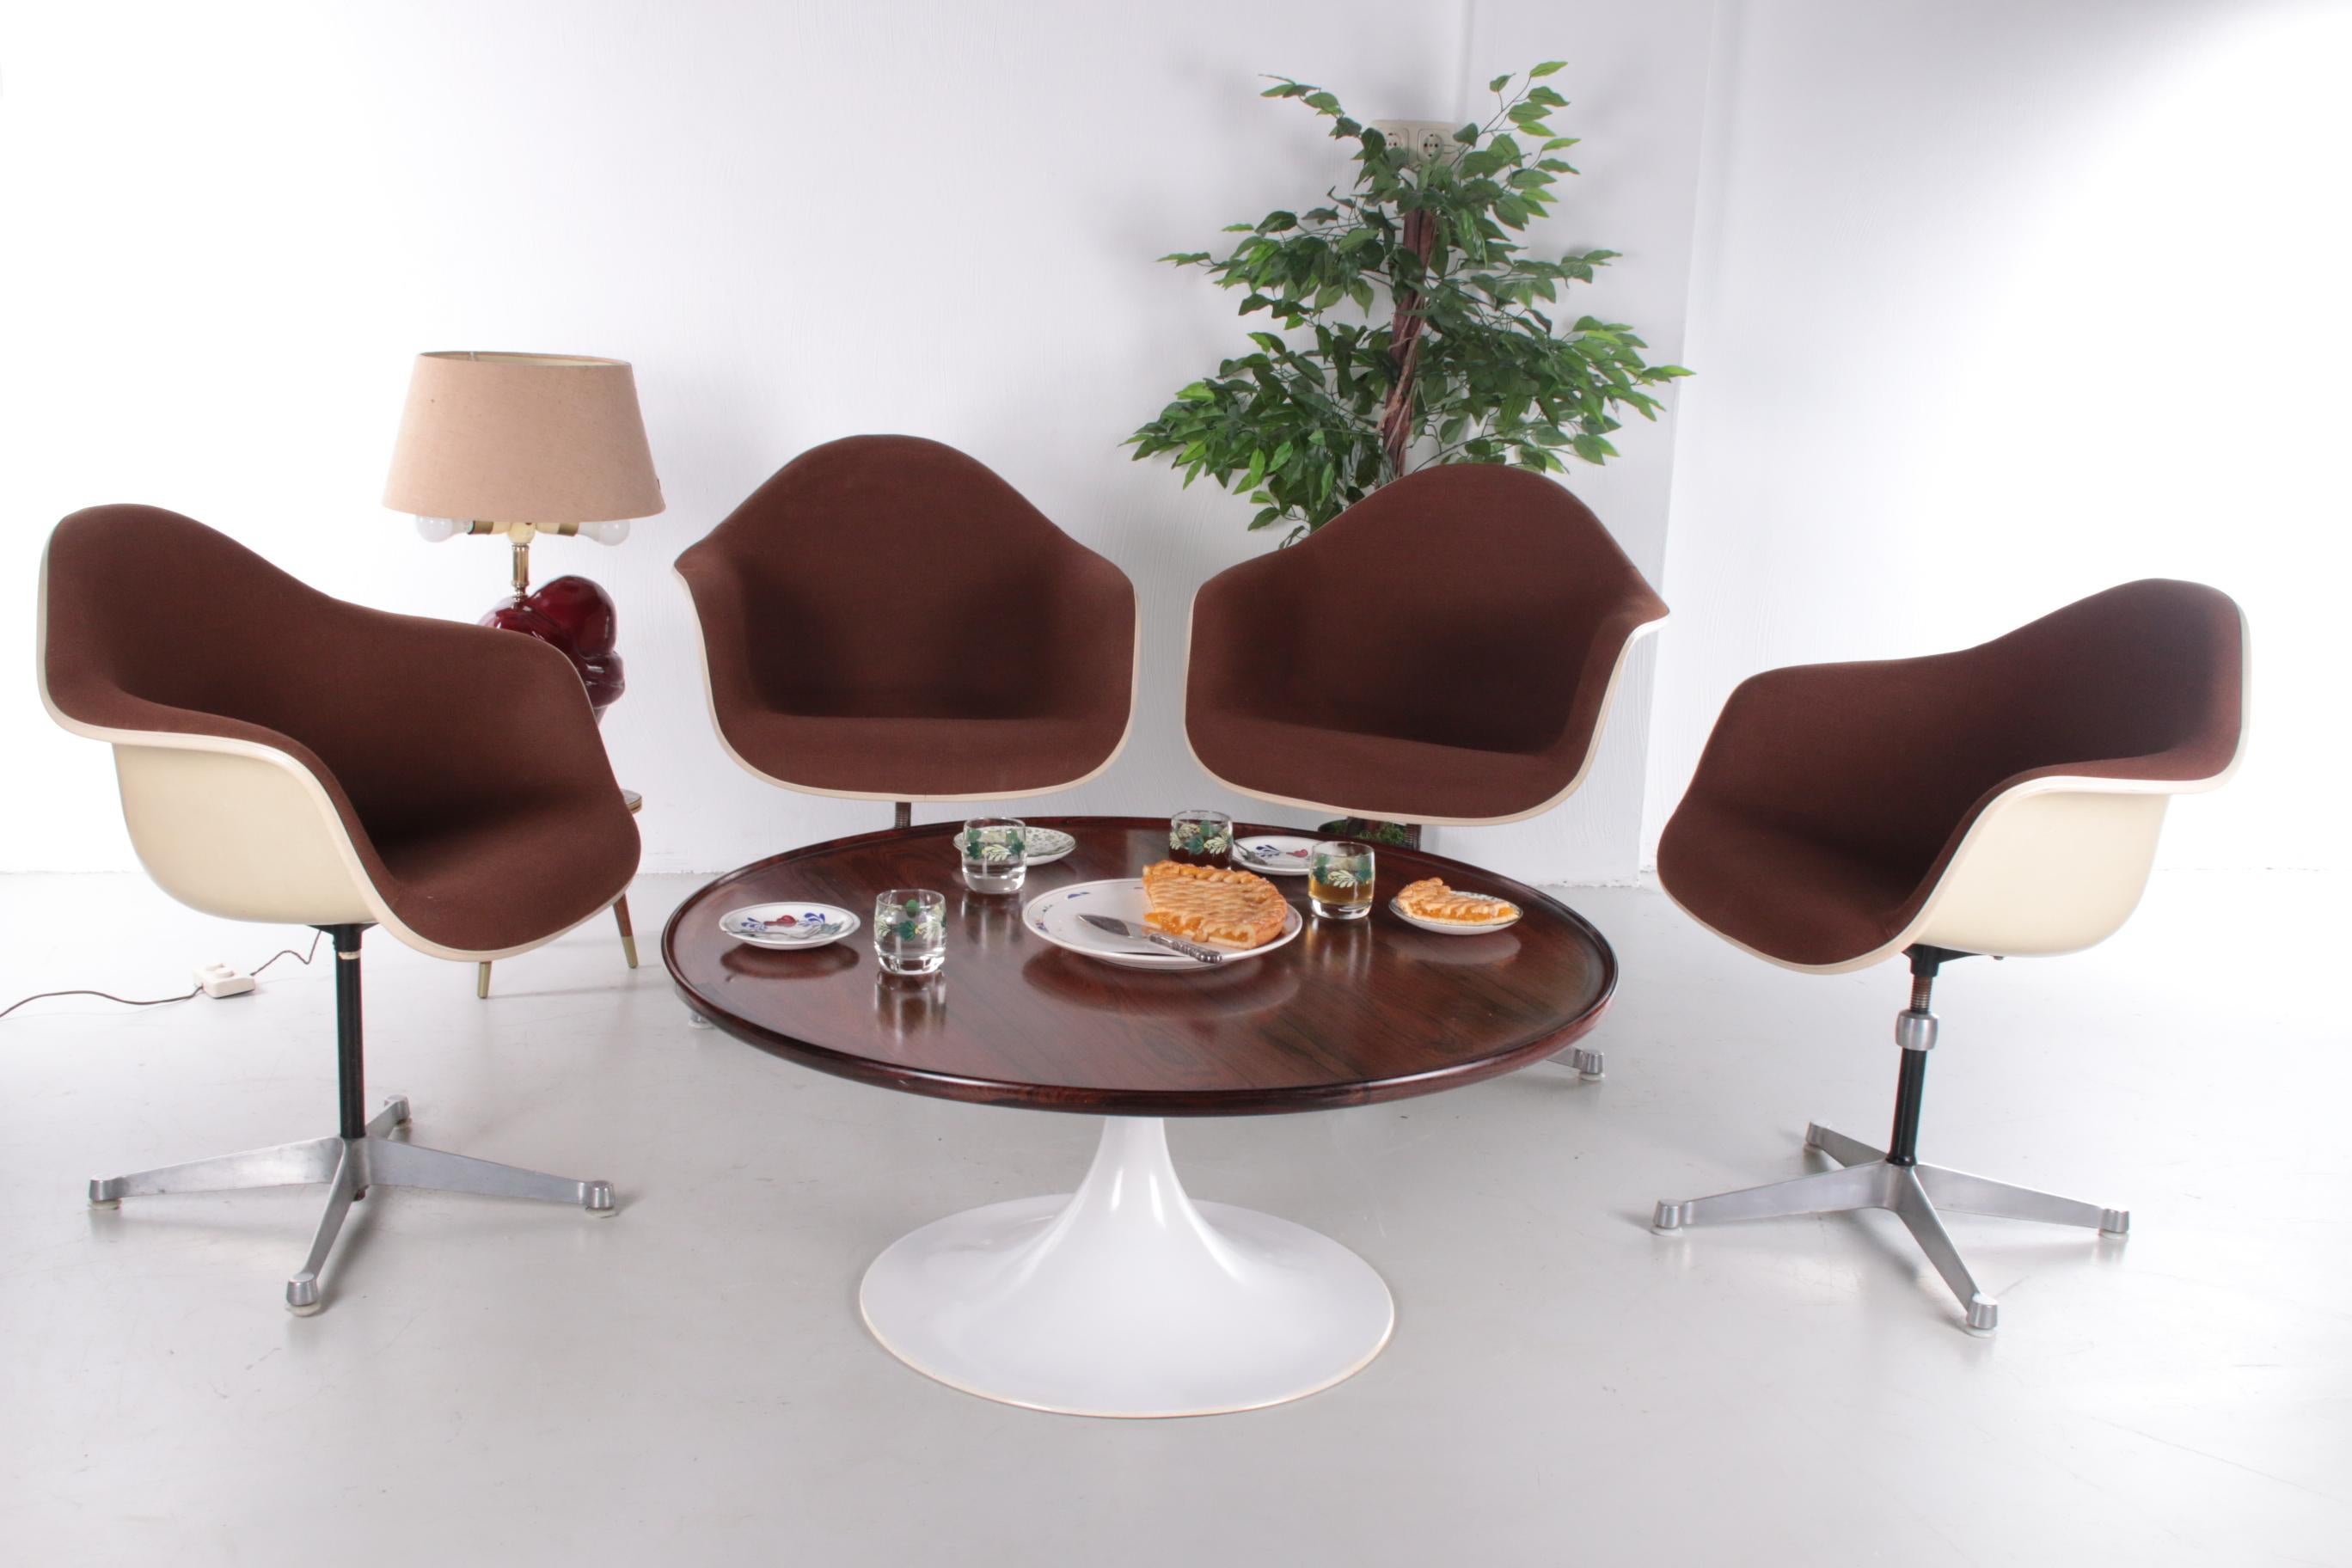 Set of 4 DAX chairs by Charles & Ray Eames for Herman Miller


Set of 4 DAX chairs designed by Charles and Ray Eames.

These were produced by Herman Miller in Venice, USA in the 1970s.

Glass fiber shells on a contract basis with blank